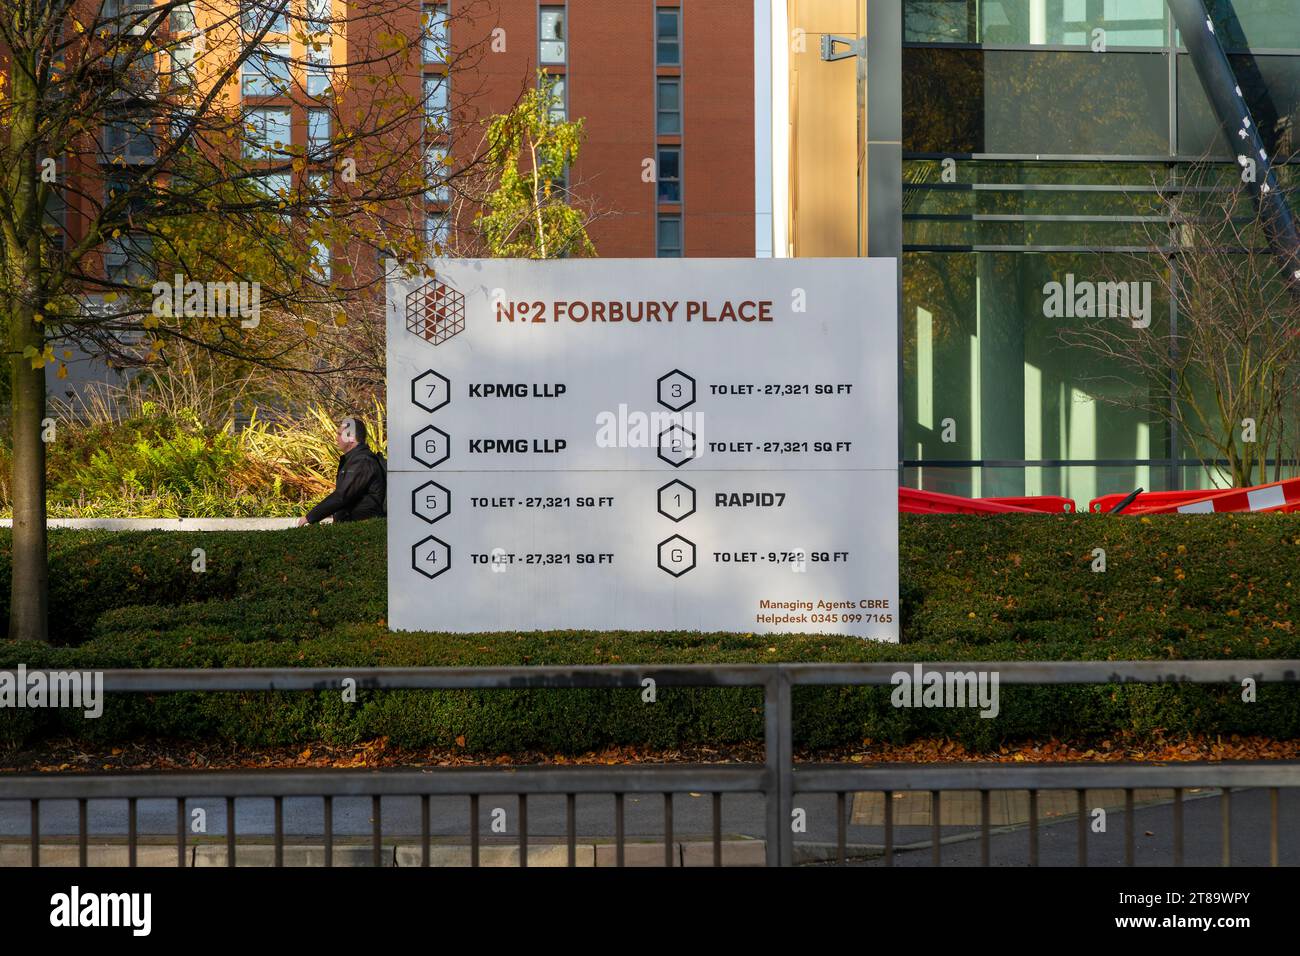 Sign advertising modern architecture office building, Forbury Place, Reading, Berkshire, England, UK Stock Photo